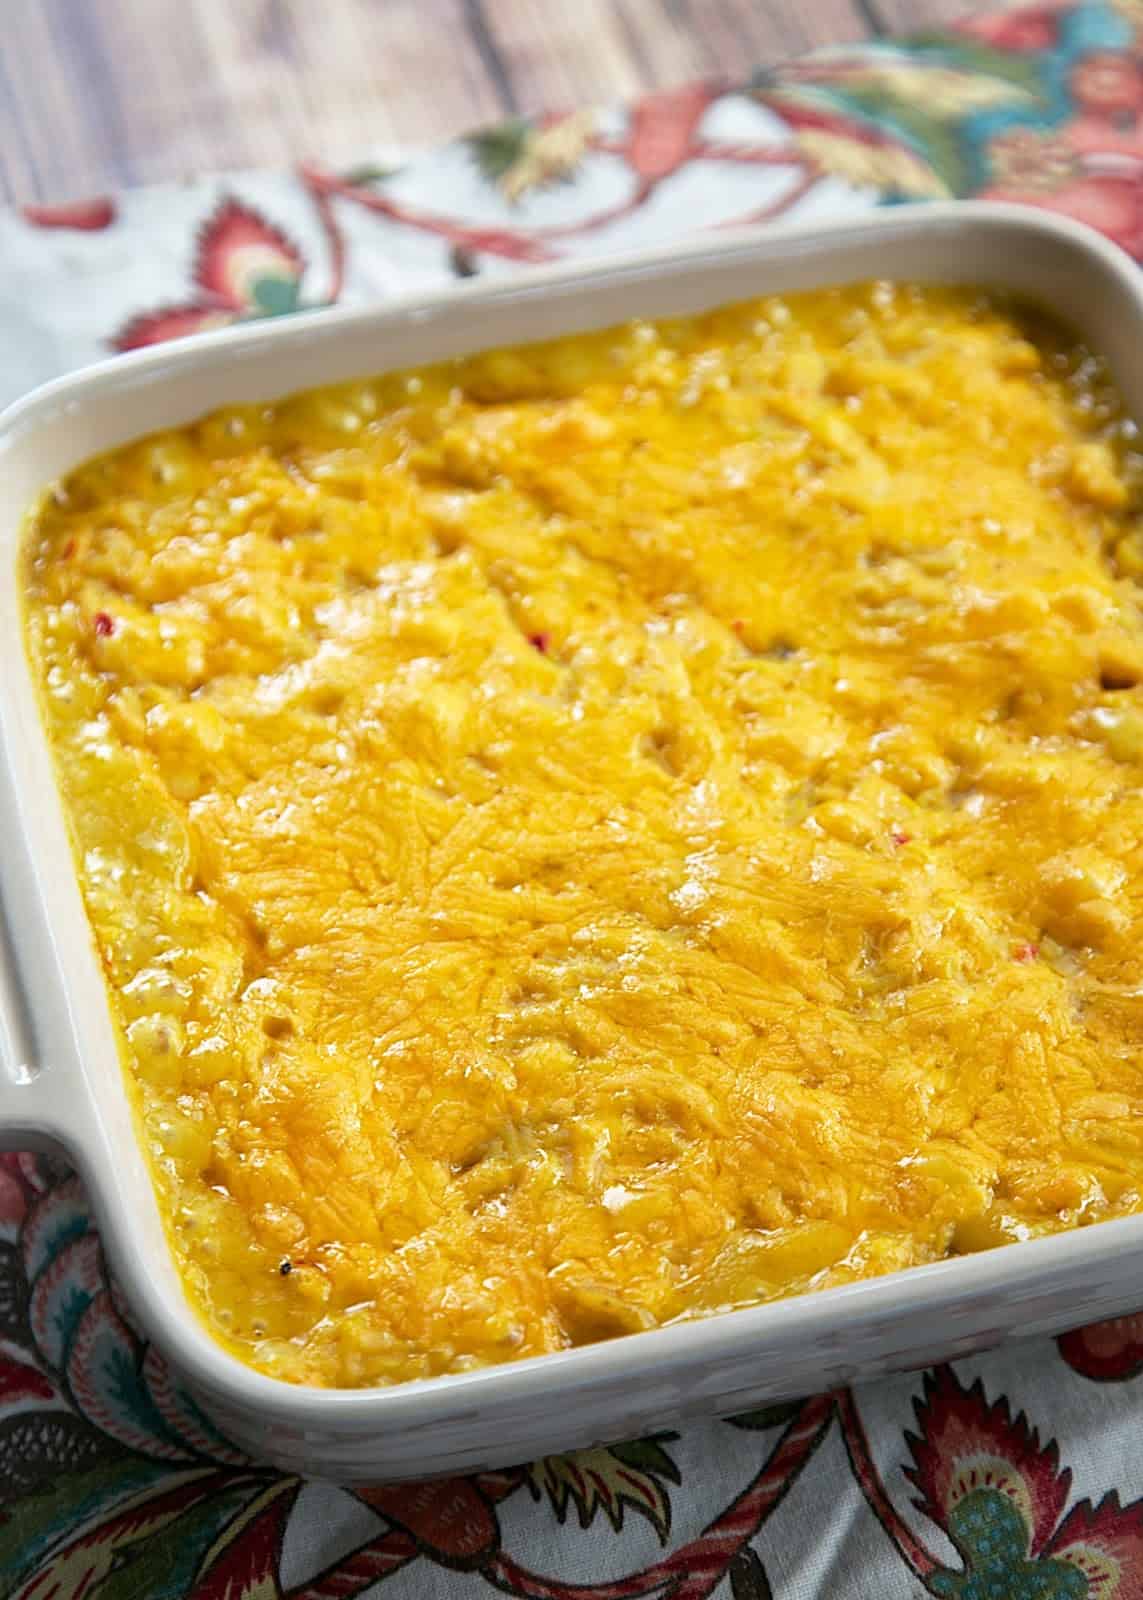 Corn and Rice Casserole - only 4 ingredients! Corn, Rice, Soup & Cheese. It is THE BEST corn casserole I've ever eaten! Can be made ahead of time. Quick side dish recipe!